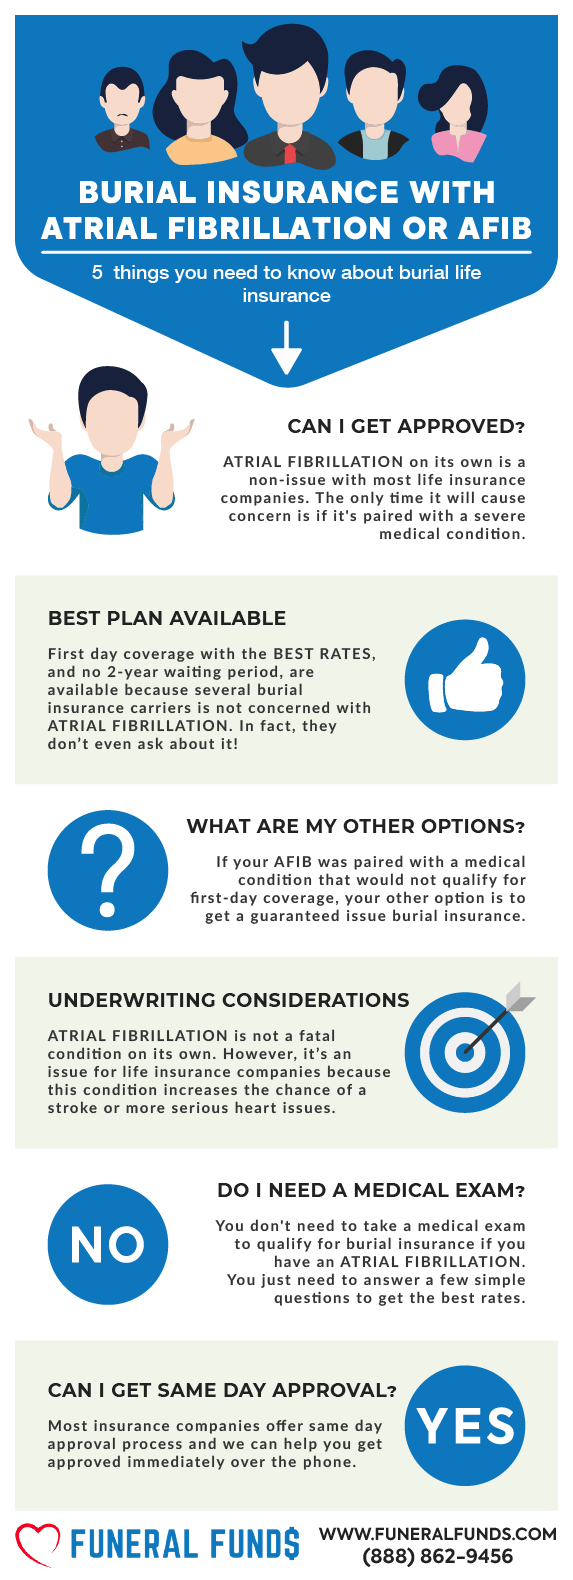 Funeral Insurance, Final Expense Insurance, Burial Insurance With Atrial Fibrillation Or AFIB Infographic